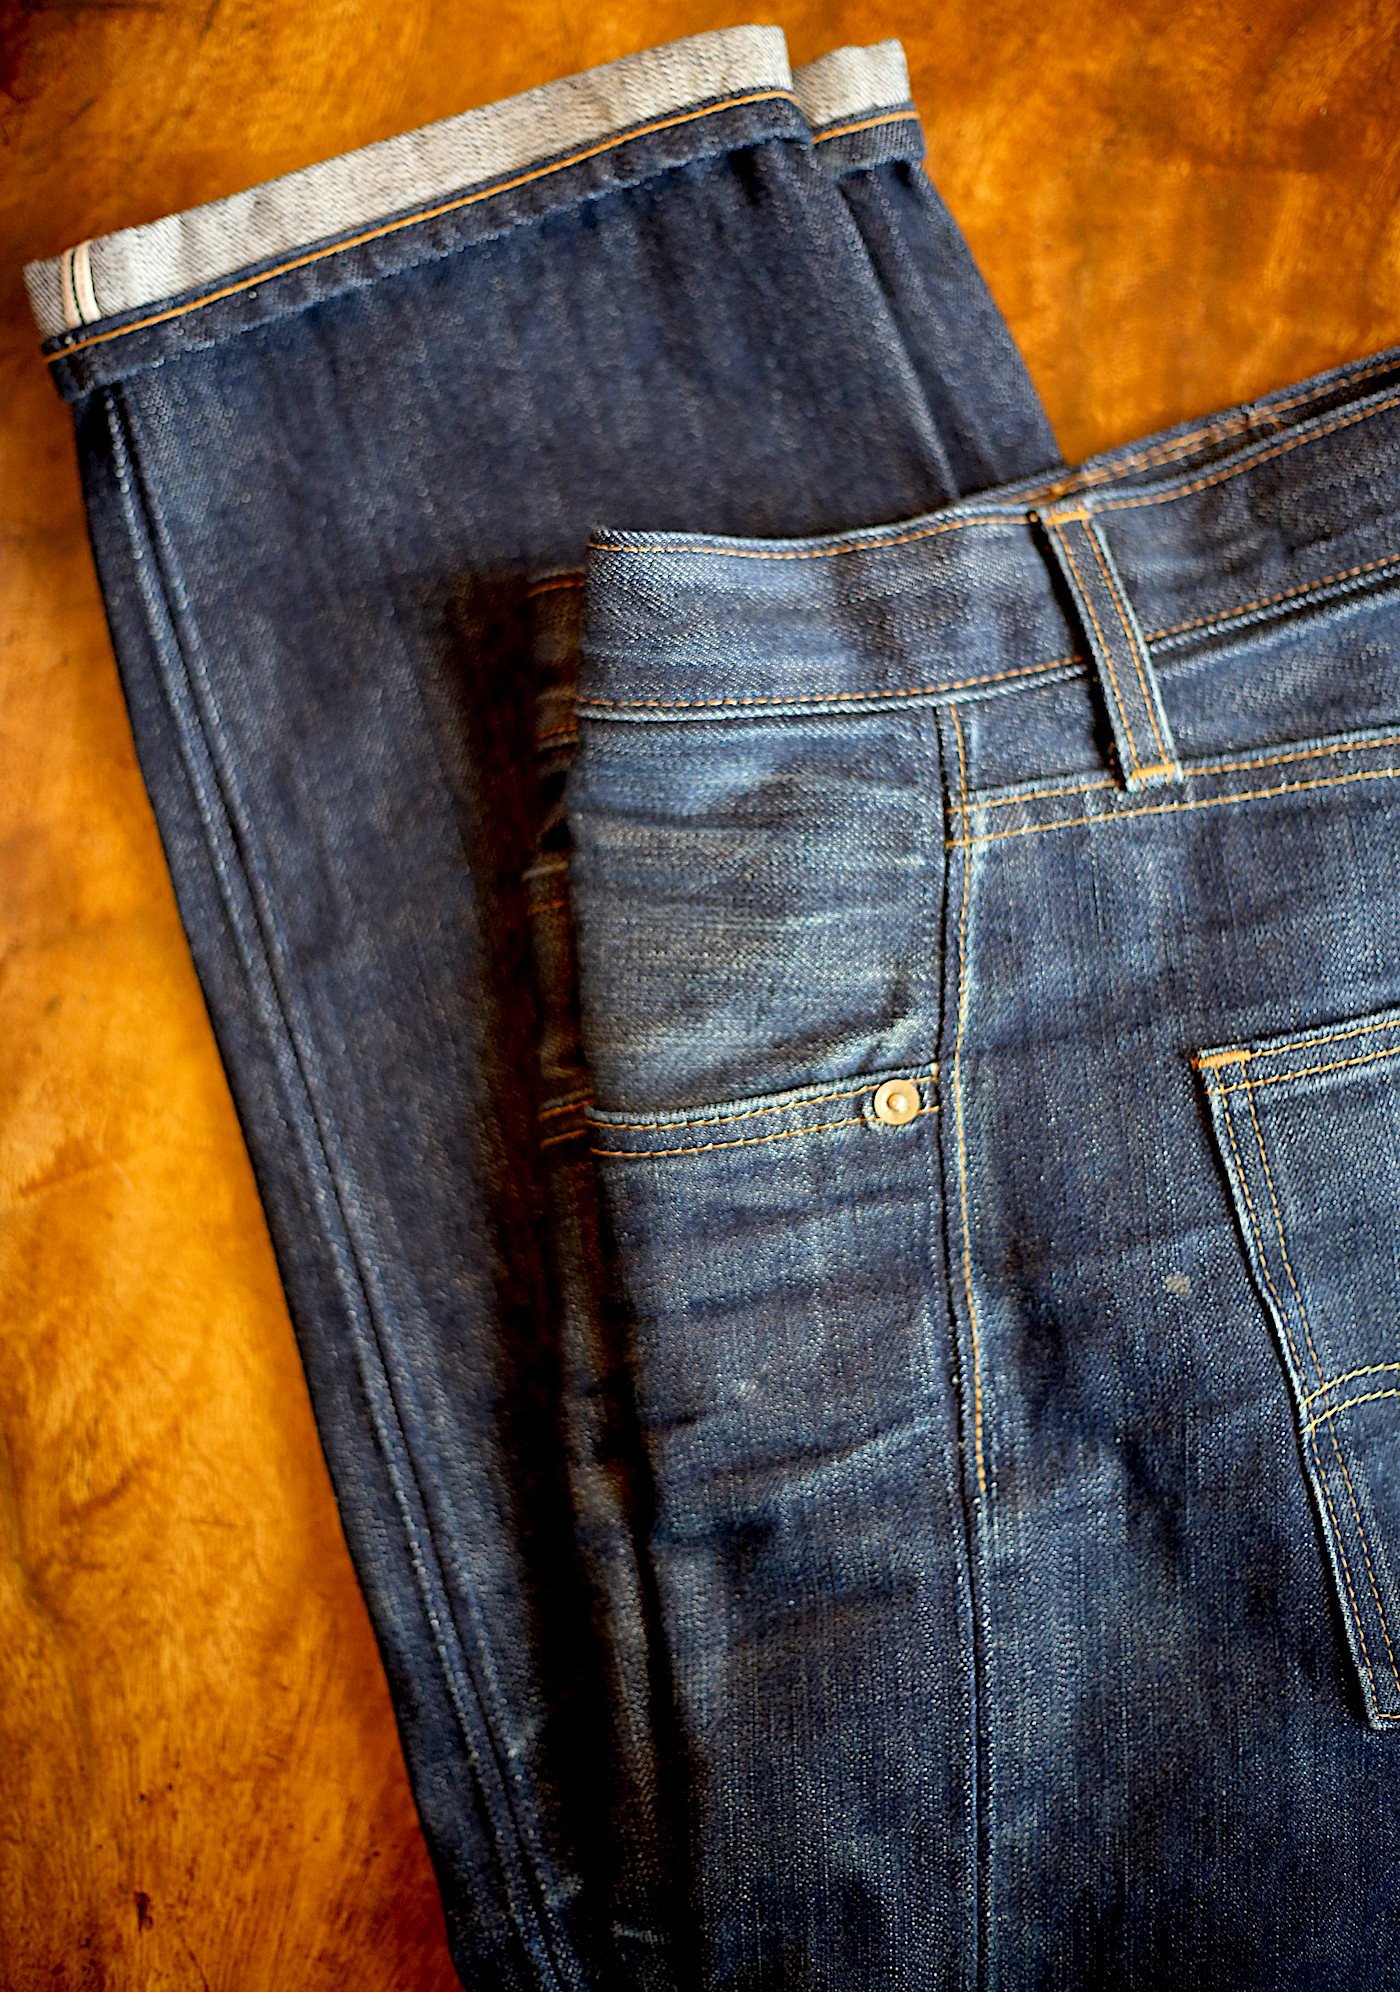 Medicinaal Opeenvolgend gans How jeans can be altered – Permanent Style